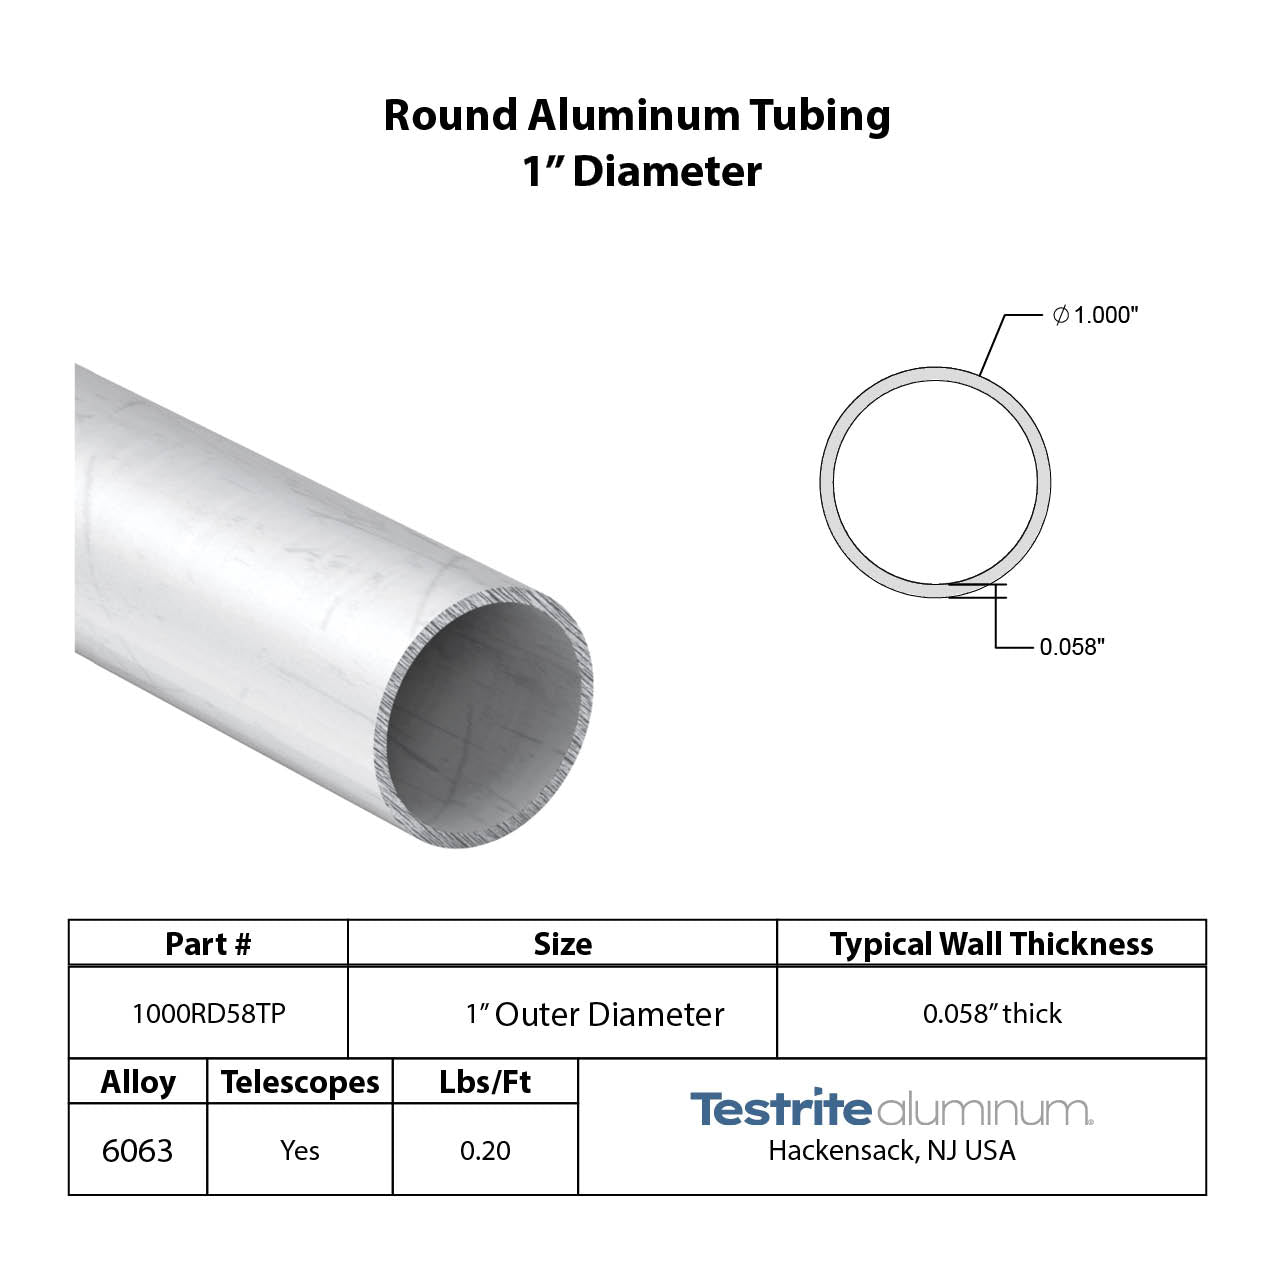 Specifications for 1" OD x .058" Wall Drawn Round Aluminum Tubing Telescopic, 1in OD x .058" wall round aluminum tube, designed to fit inside our 1-1/8" OD x .058" wall tube and to accept our 7/8" OD x .058" Wall tube inside of it, all telescoping compatible